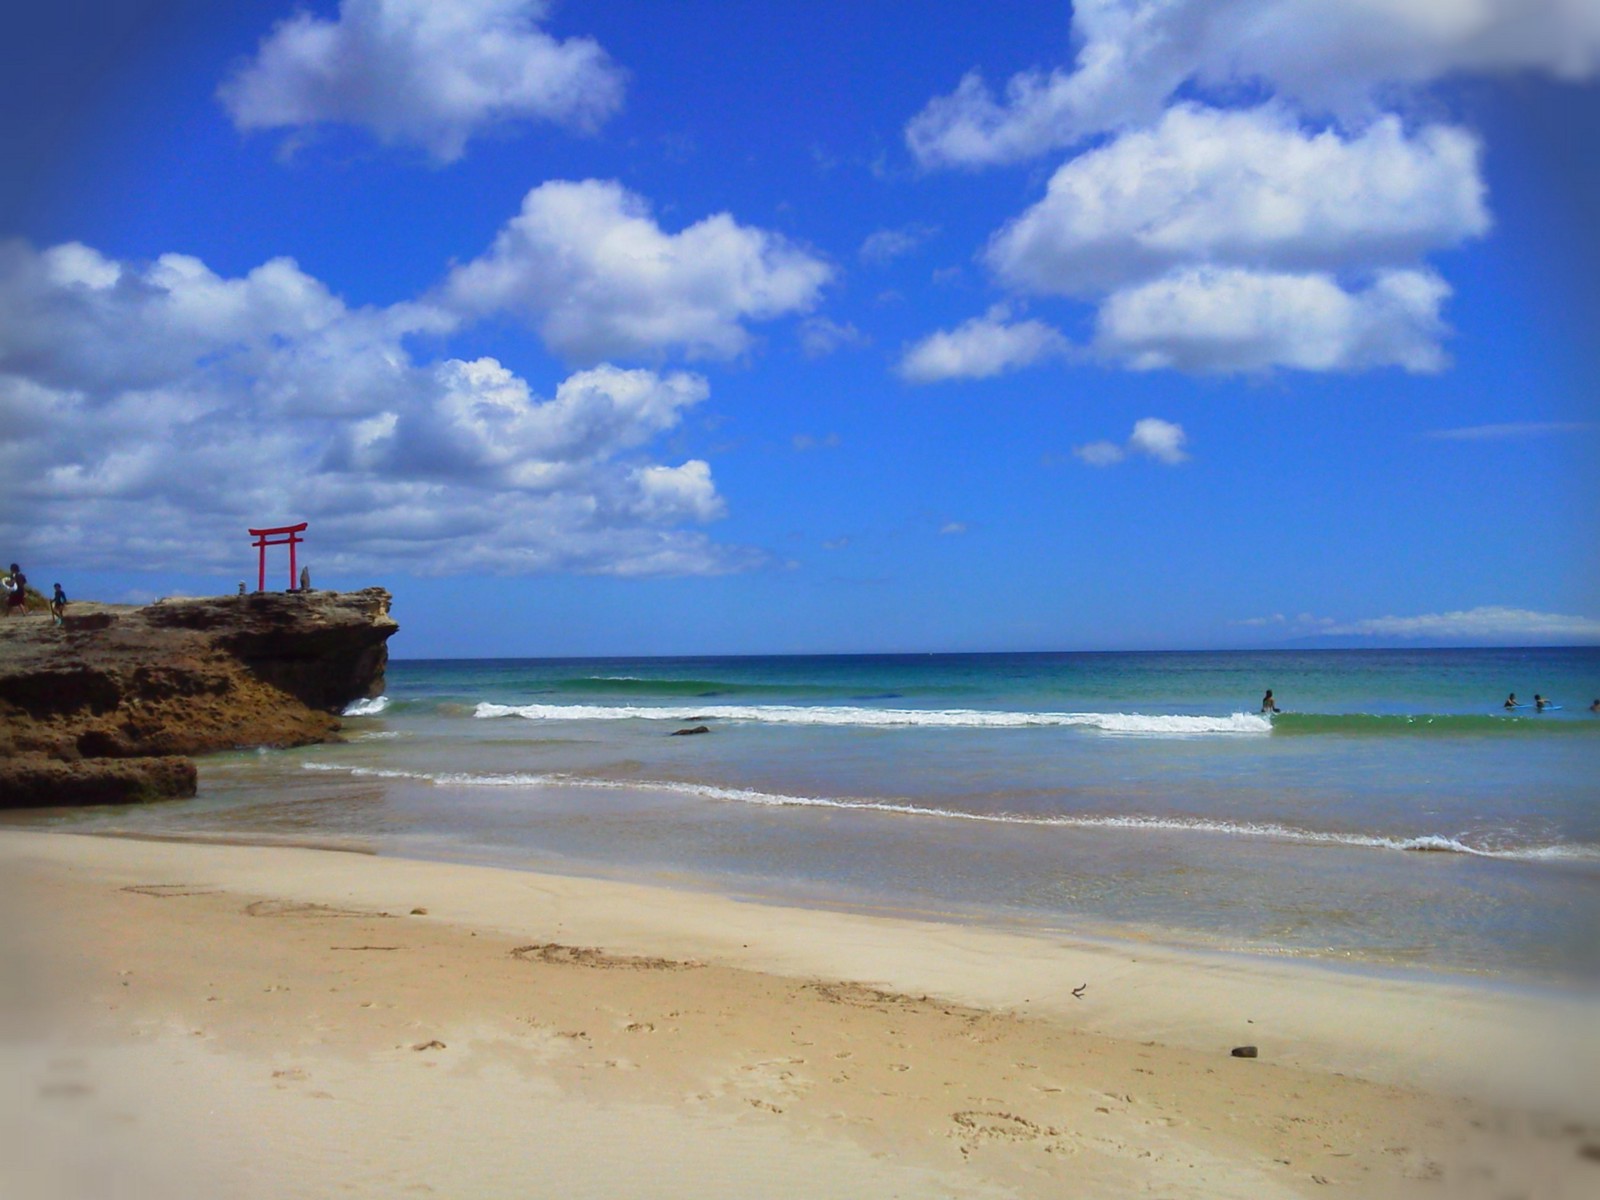 The beautiful Shirahama Beach with the red torii gate and the blue sky